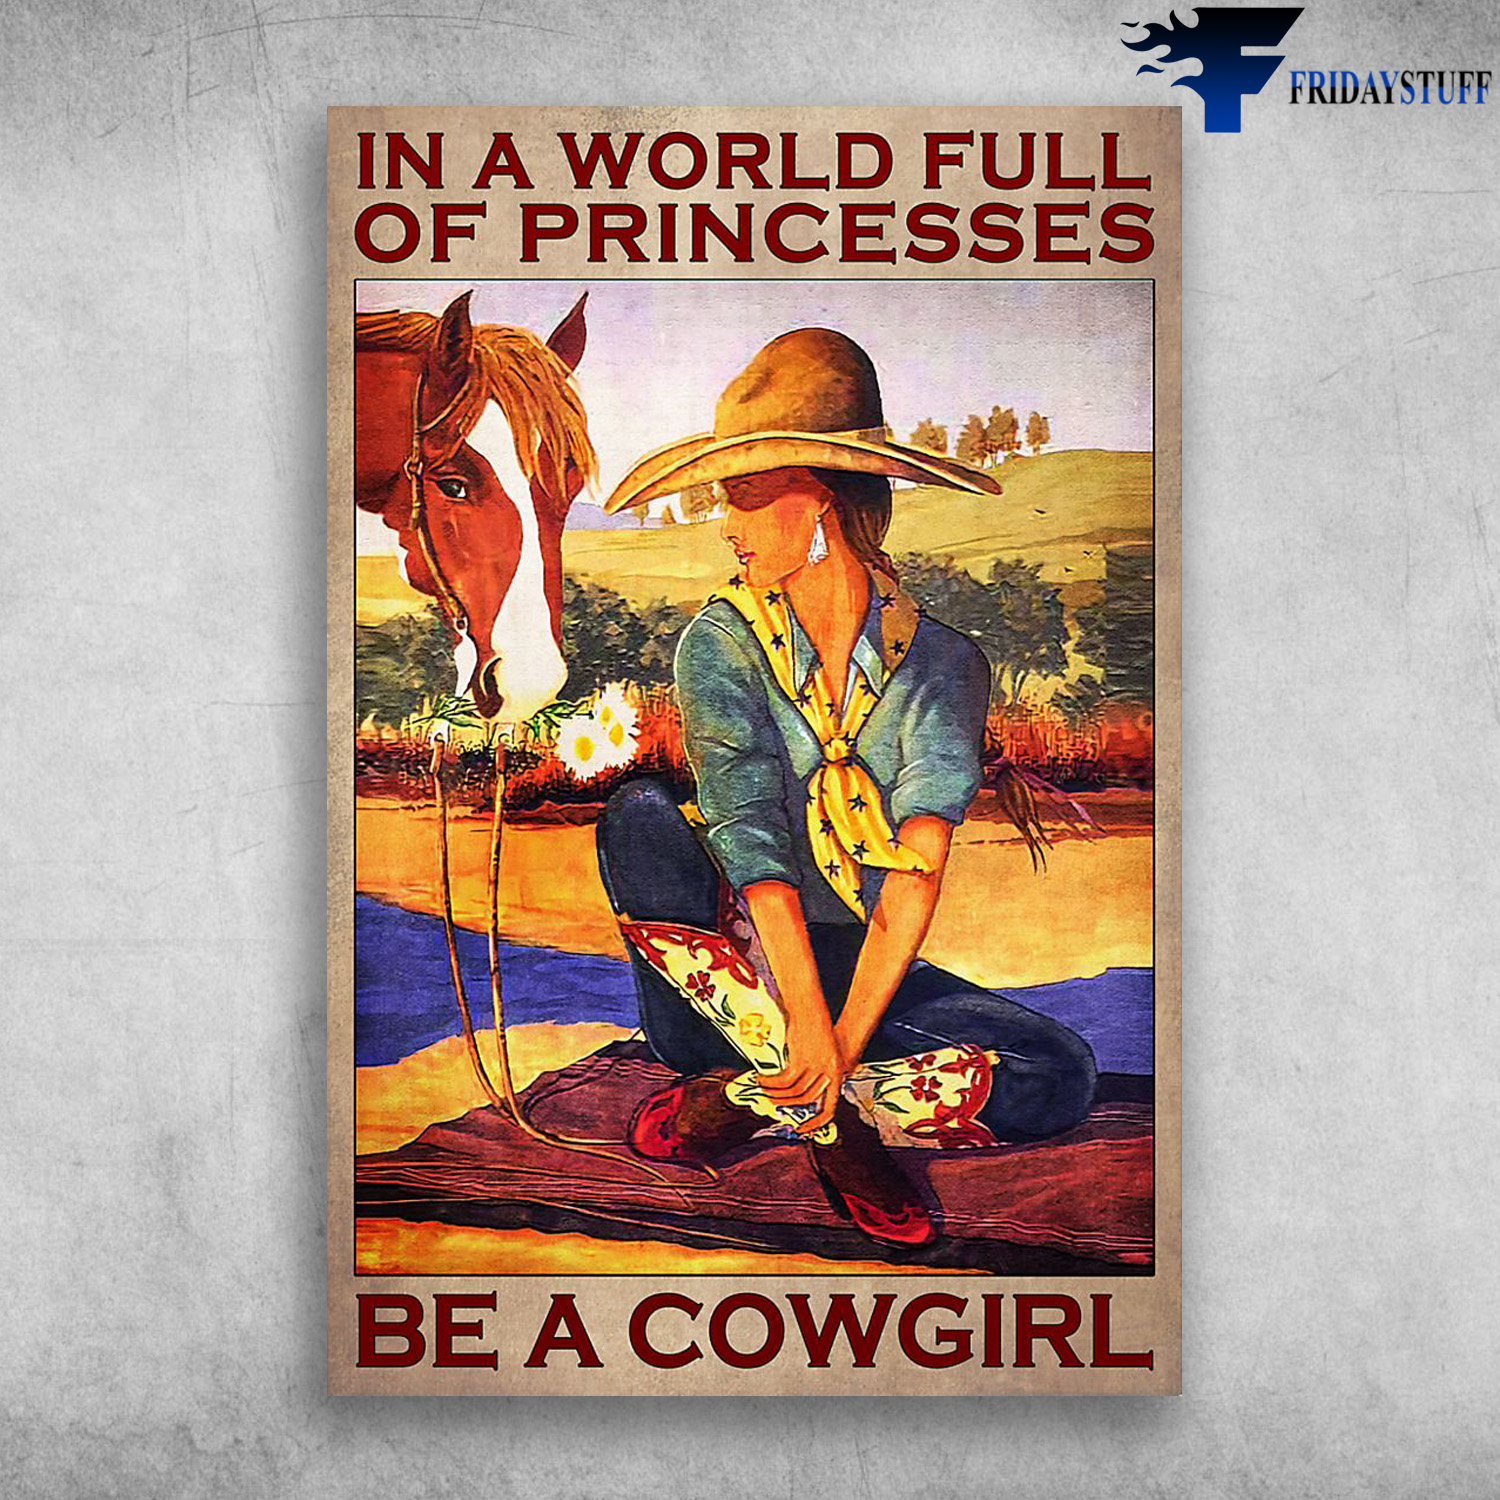 Cowgirl And Horse -In A World Full Of Princesses Be A Cowgirl